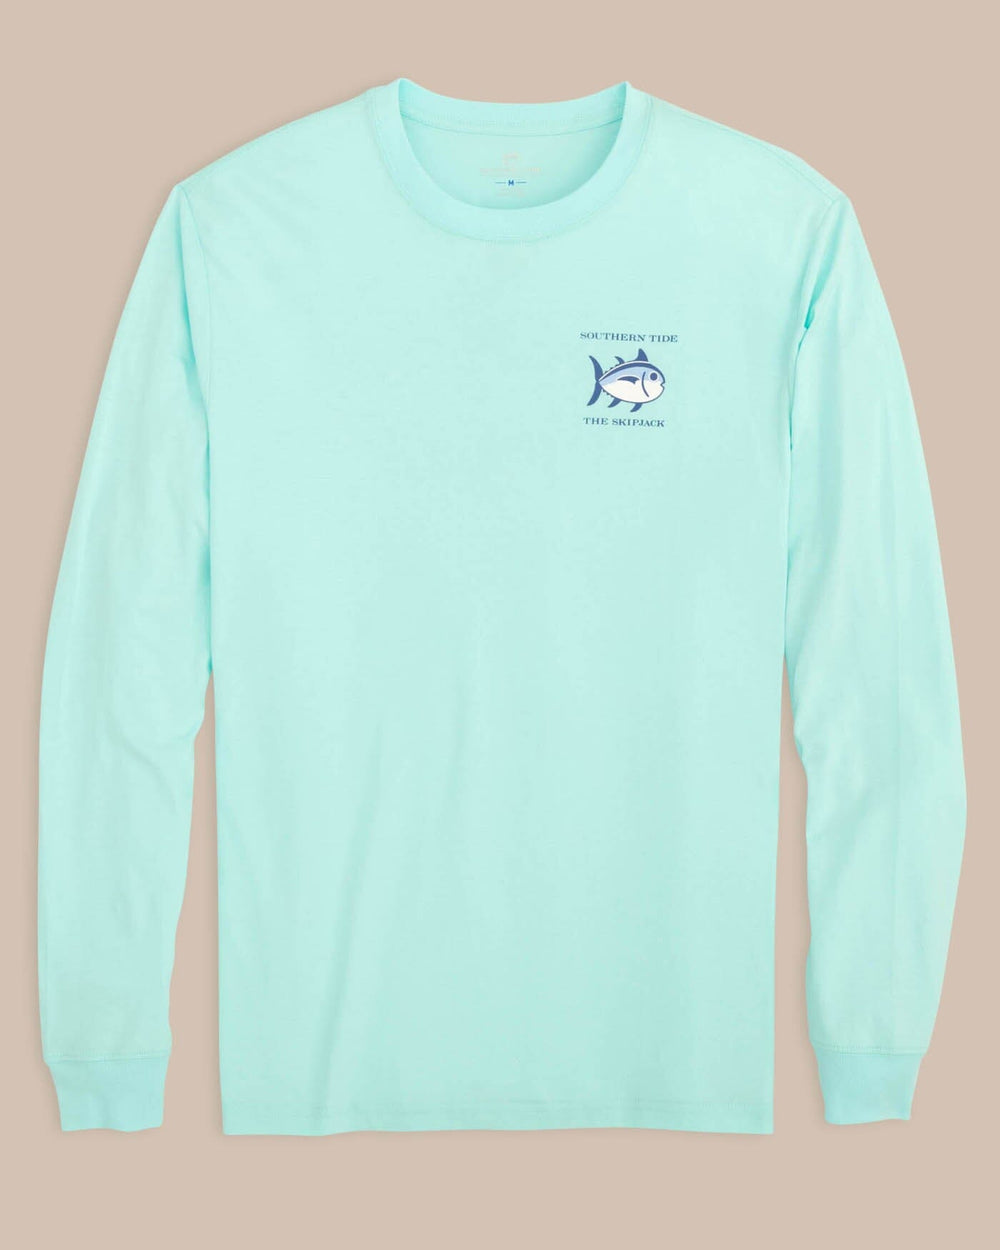 The front view of the Southern Tide Long Sleeve Original Skipjack T-Shirt by Southern Tide - Baltic Teal